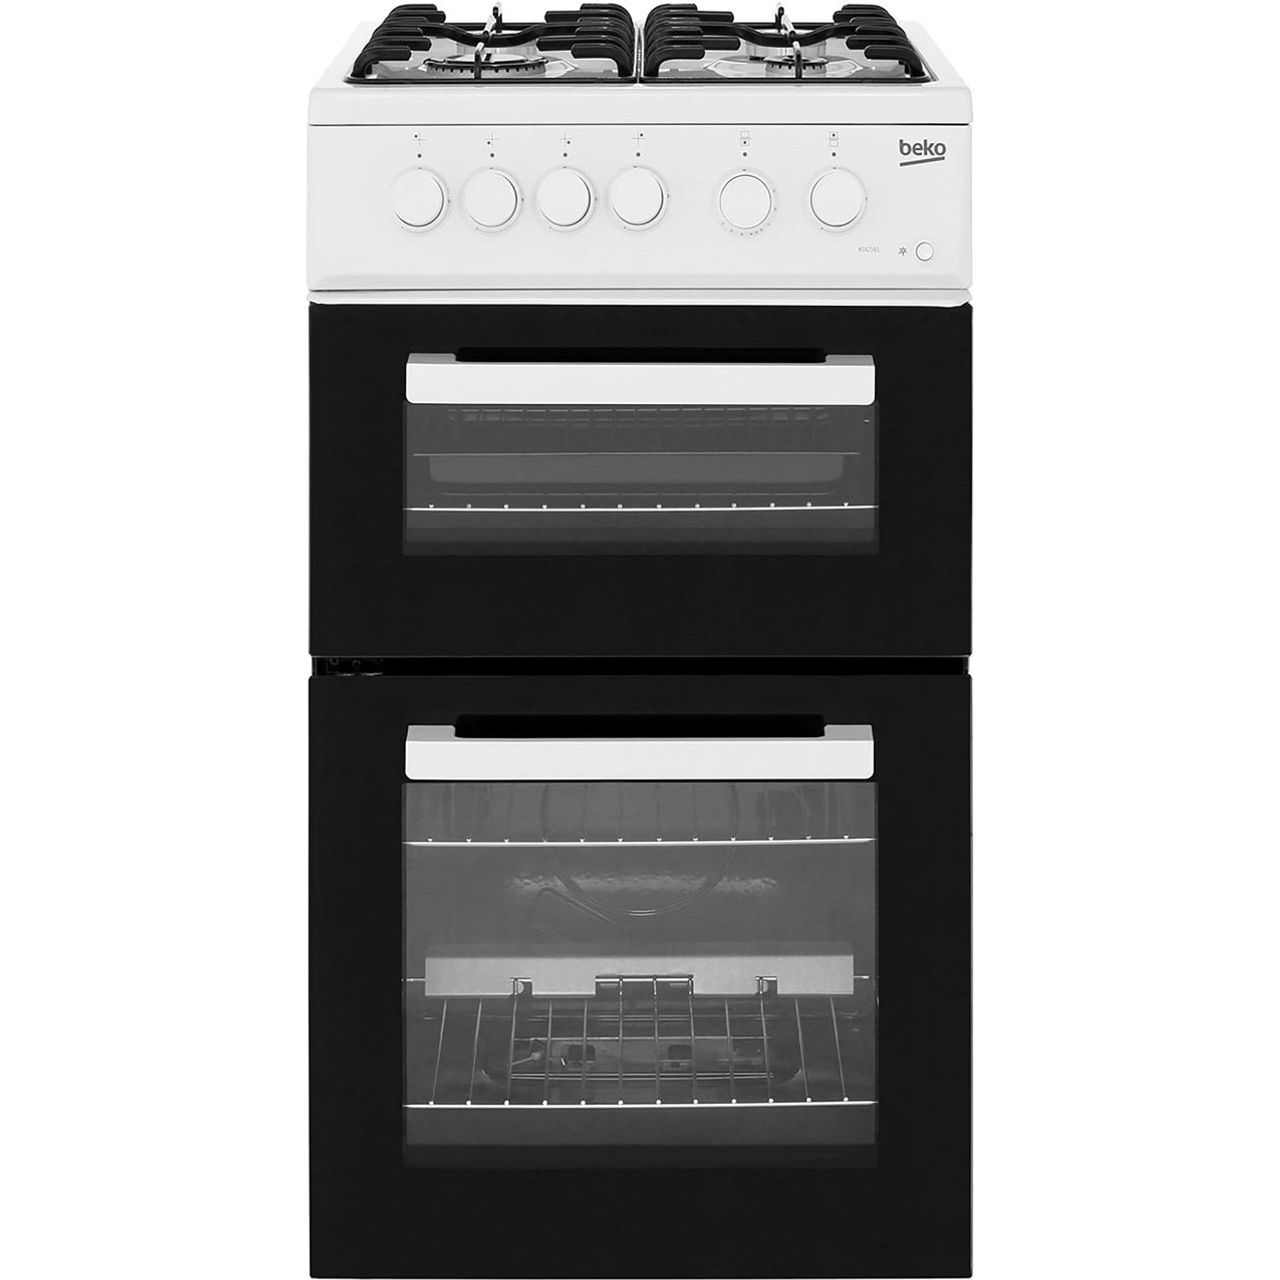 Beko KDG581W 50cm Gas Cooker with Full Width Gas Grill Review